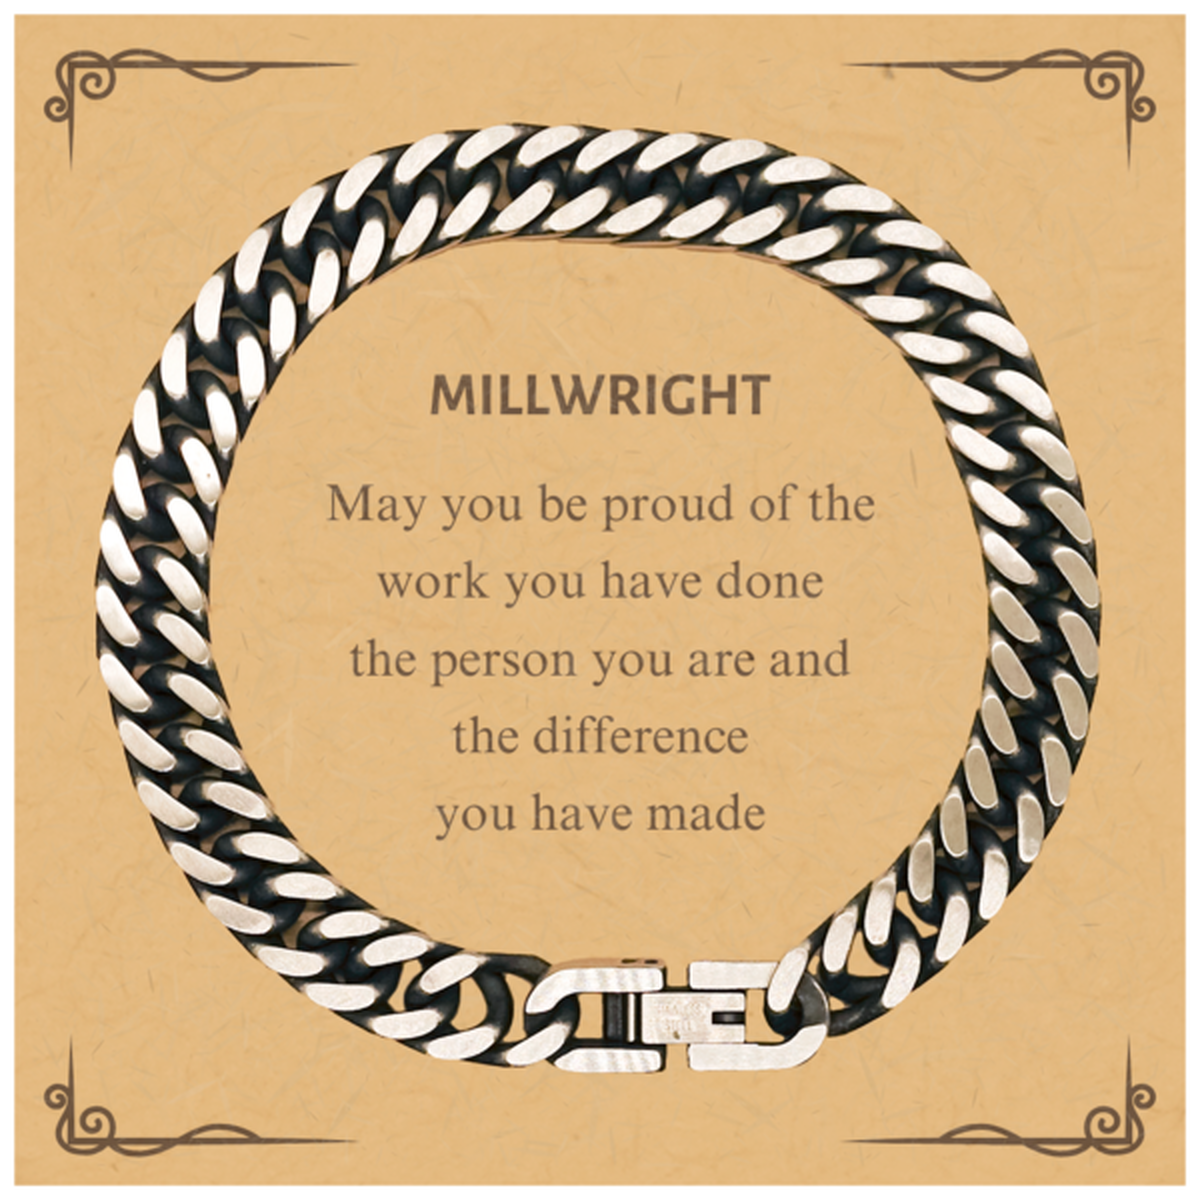 Millwright May you be proud of the work you have done, Retirement Millwright Cuban Link Chain Bracelet for Colleague Appreciation Gifts Amazing for Millwright